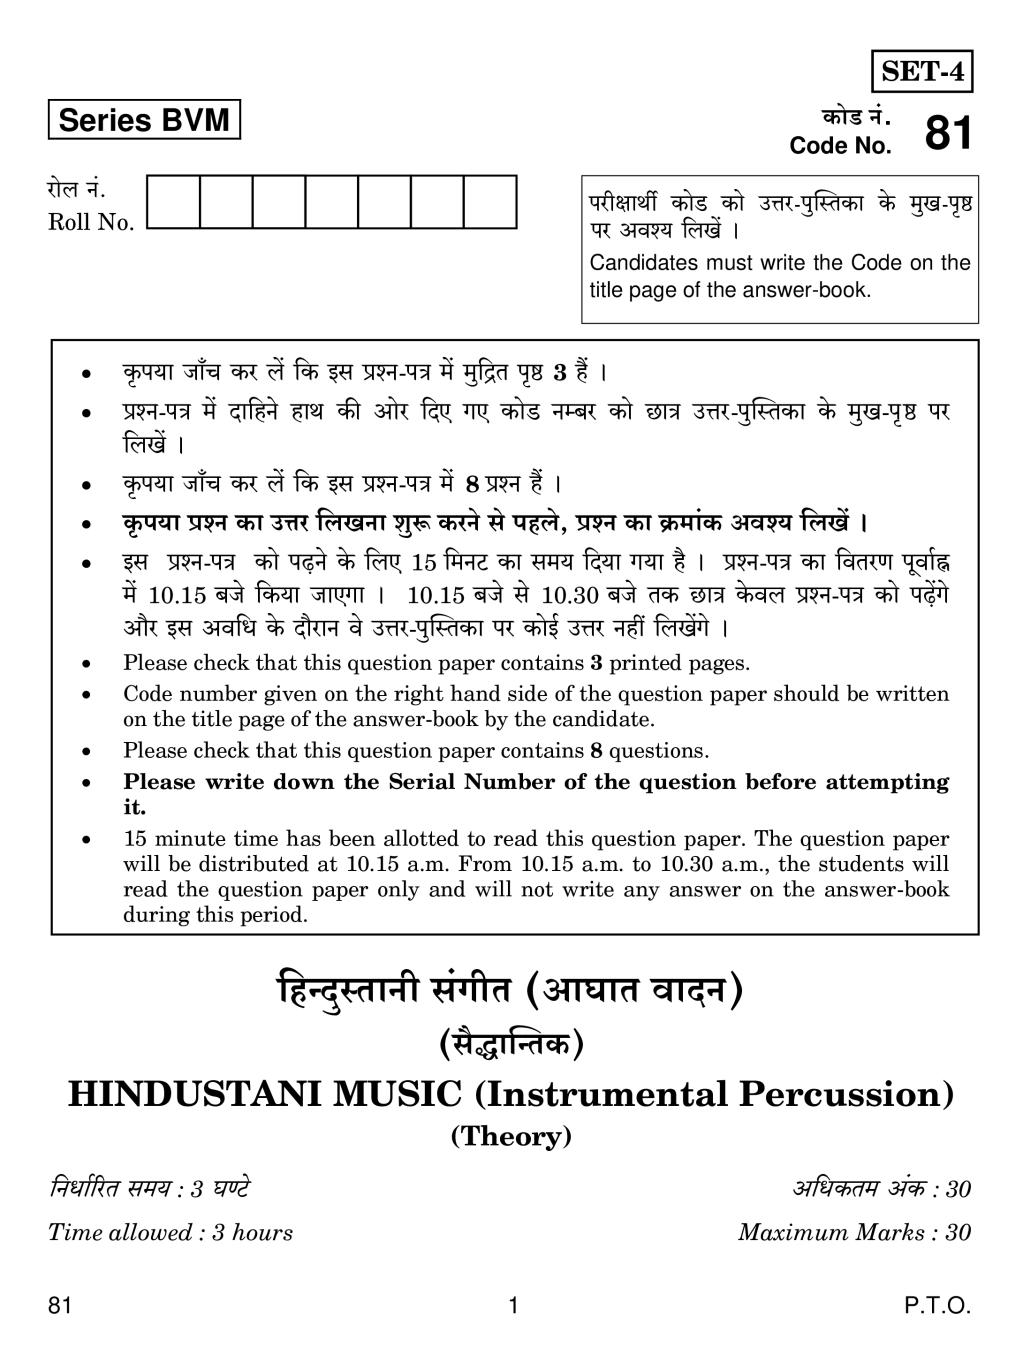 CBSE Class 12 Music Hindustani (Instrumental Percussion) Question Paper 2019 - Page 1